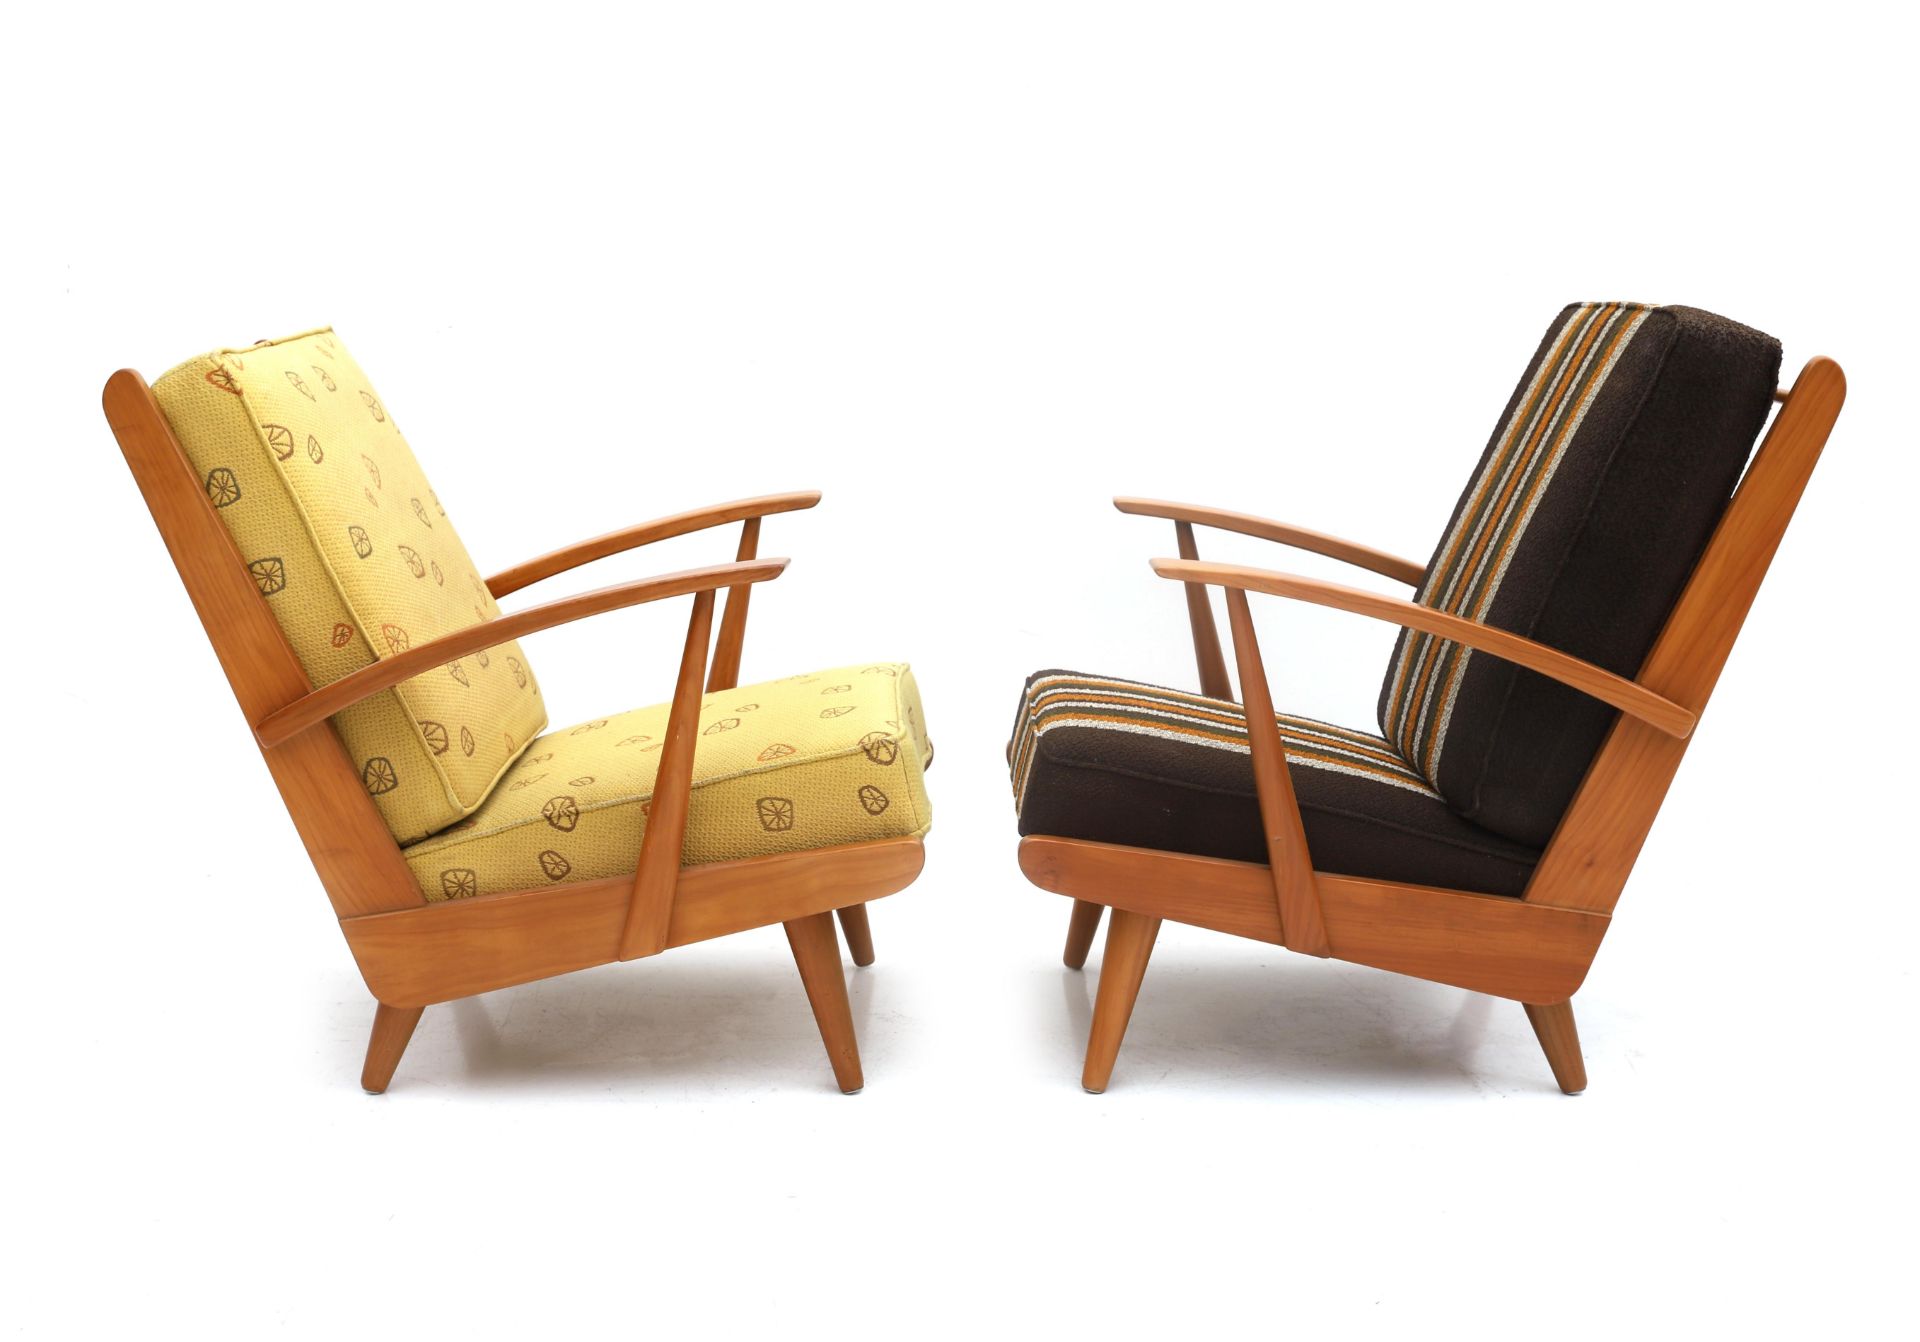 Midcentury Modern A pair of beech wood easy chairs with re-upholstered cushions. 82 cm. h. (2x)